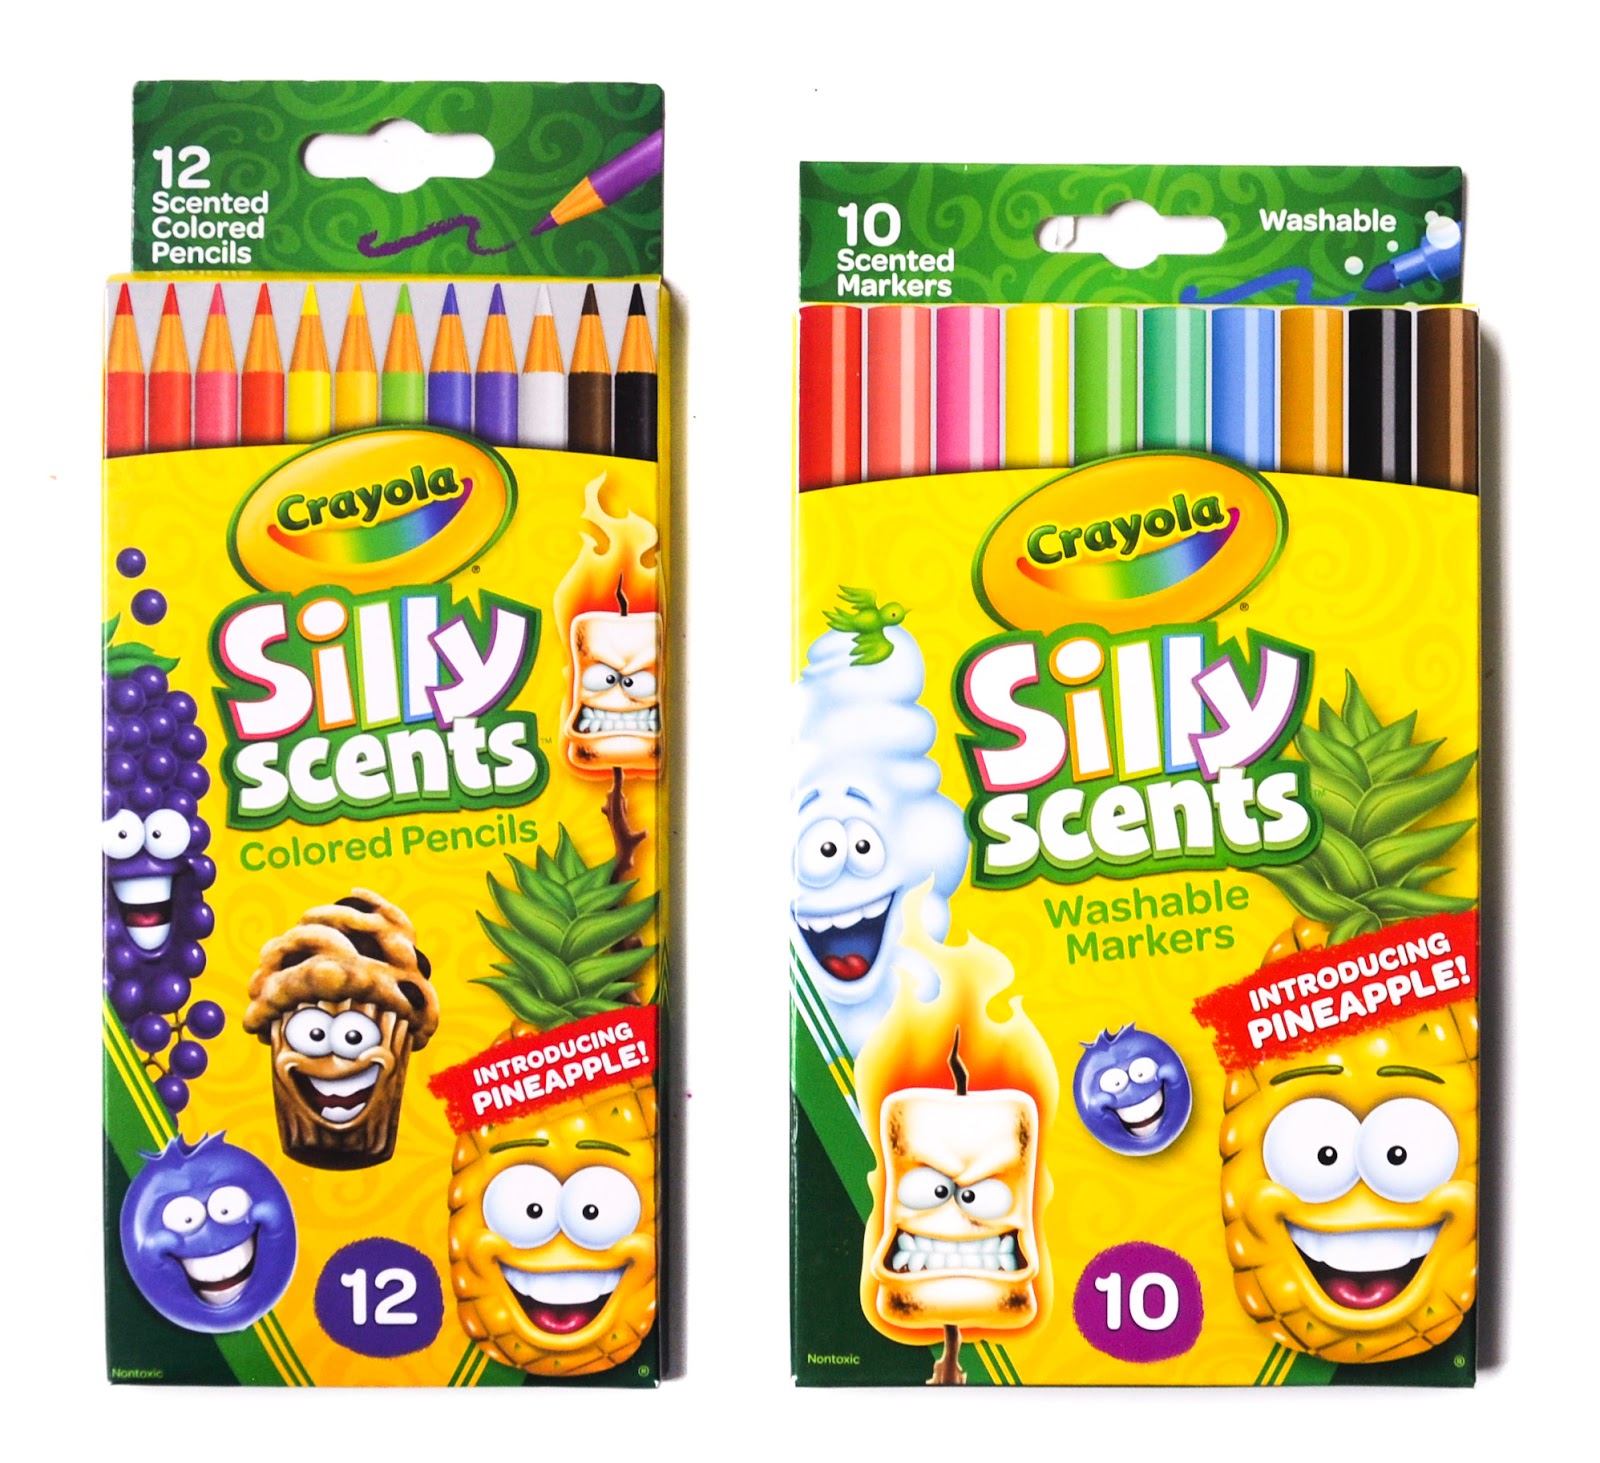 Crayola Silly Scents with Pineapple